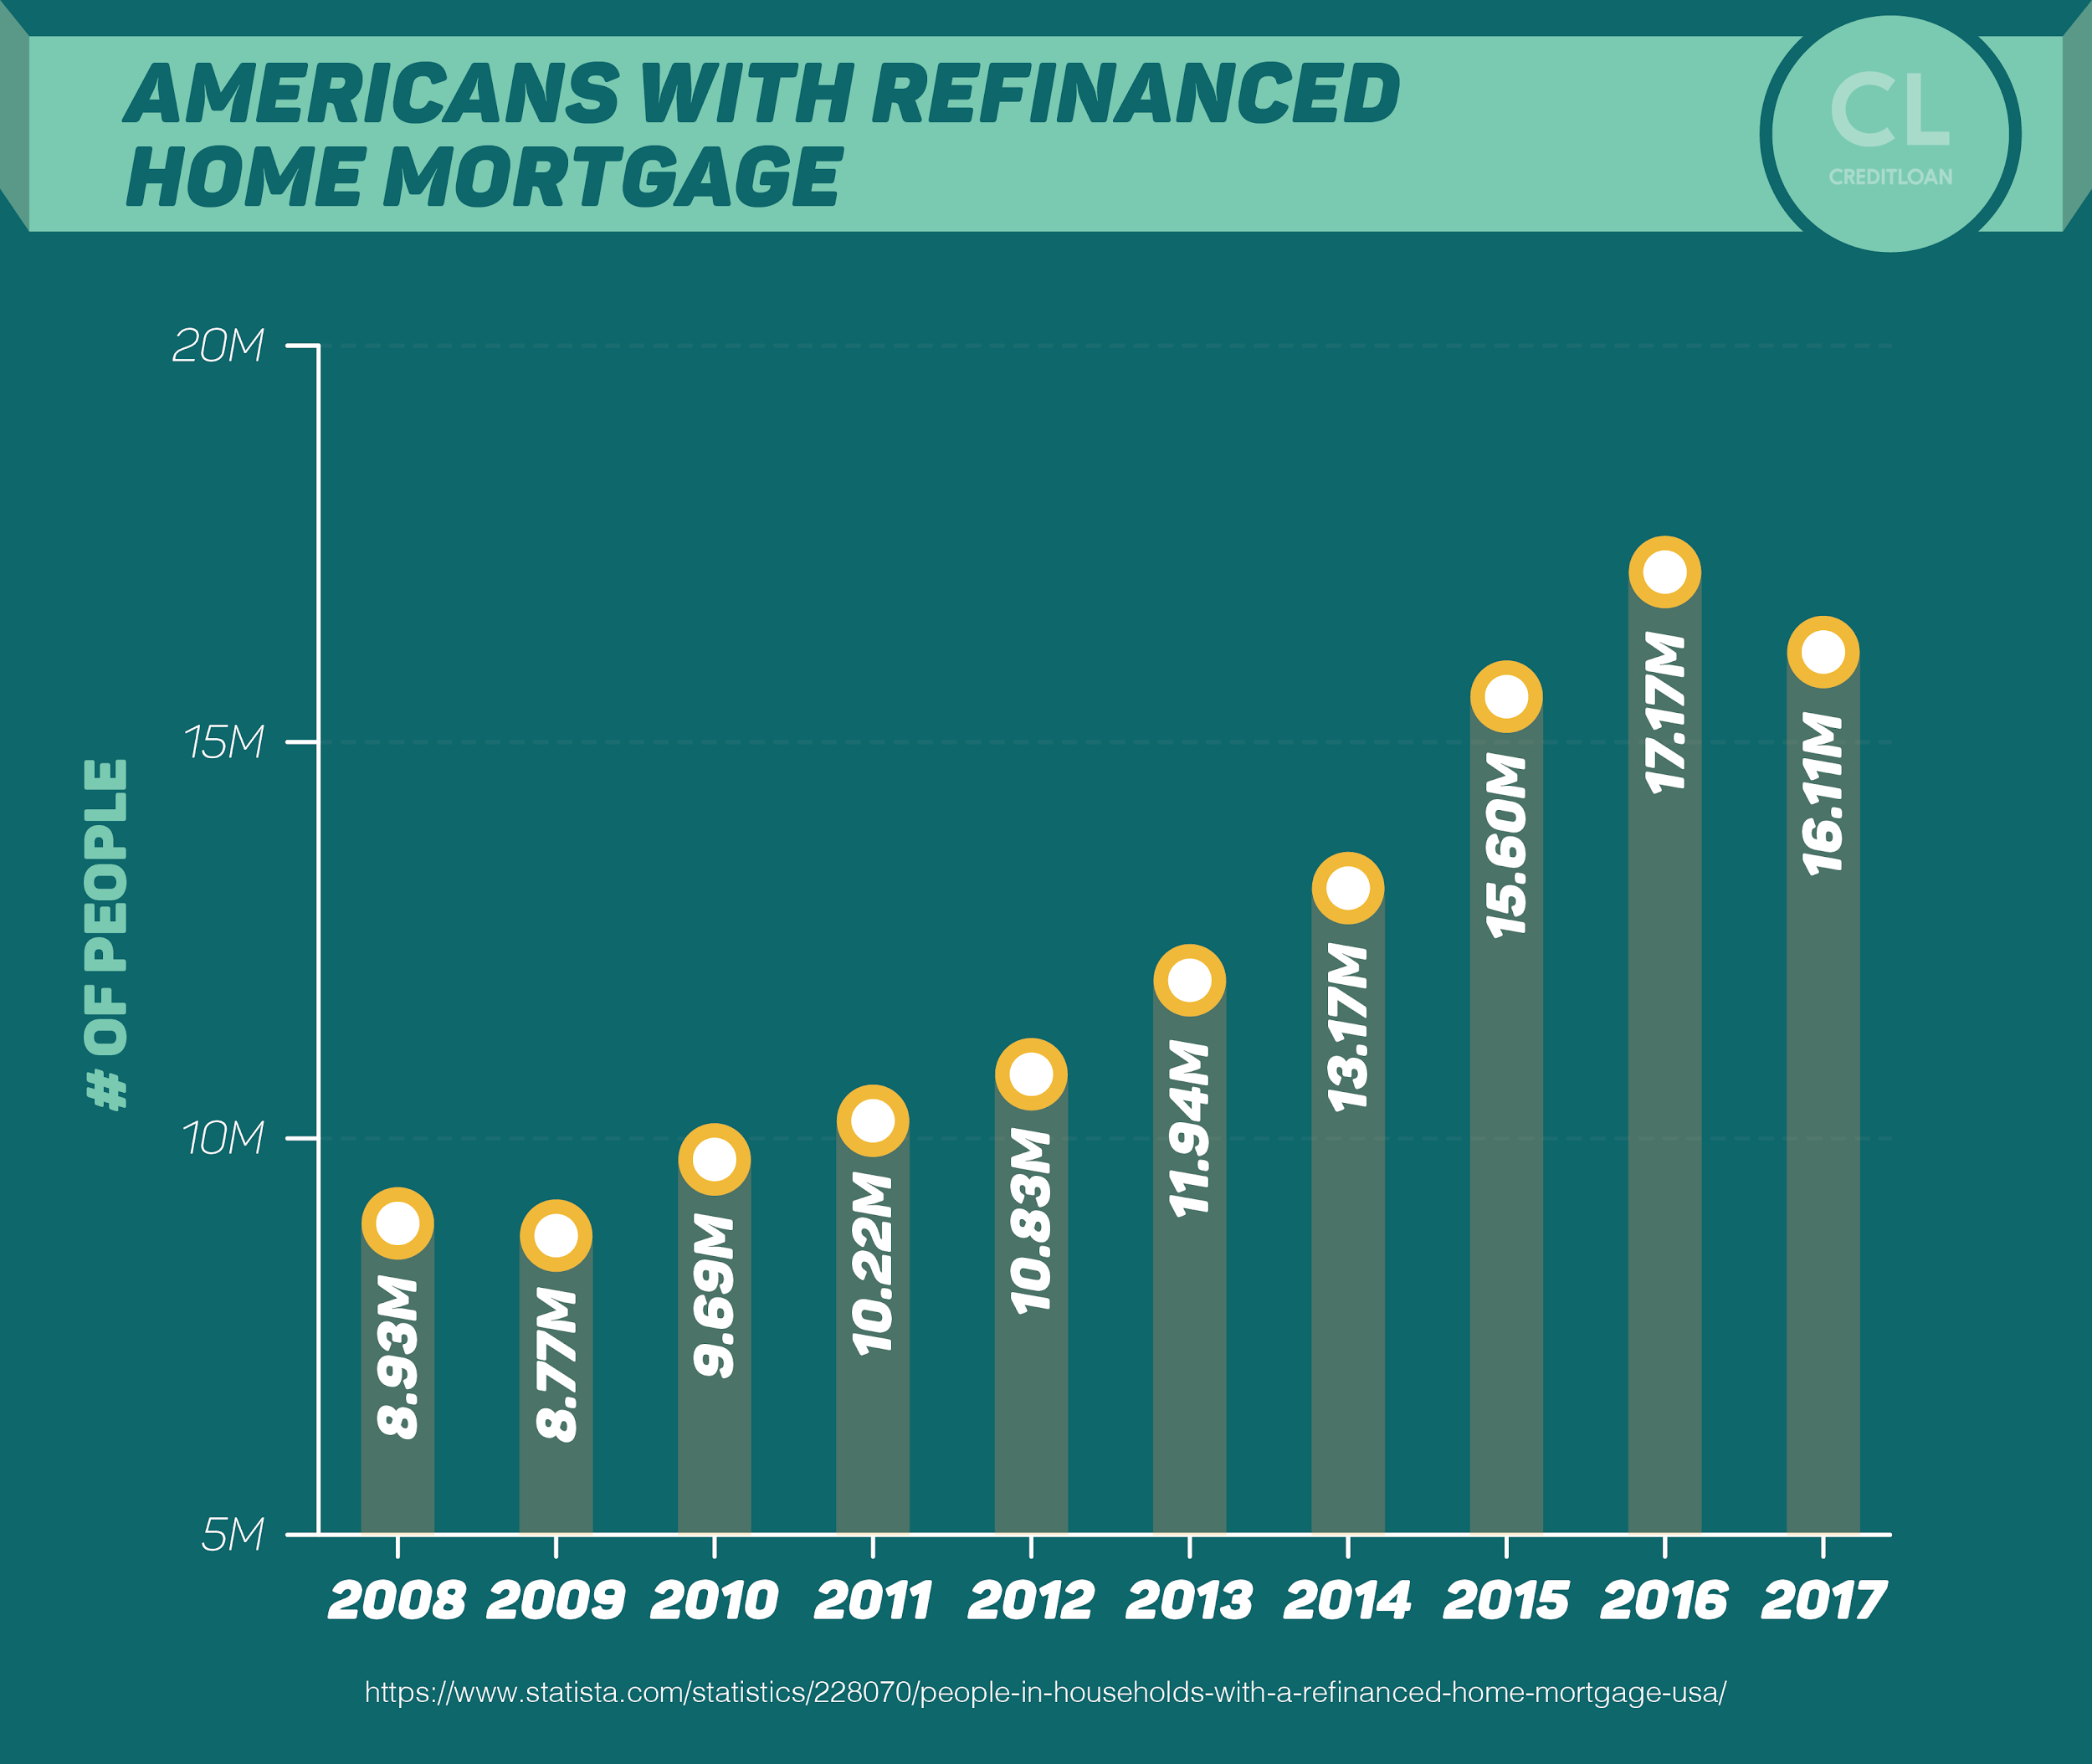 Americans With Refinanced Home Mortgage from 2008-2017